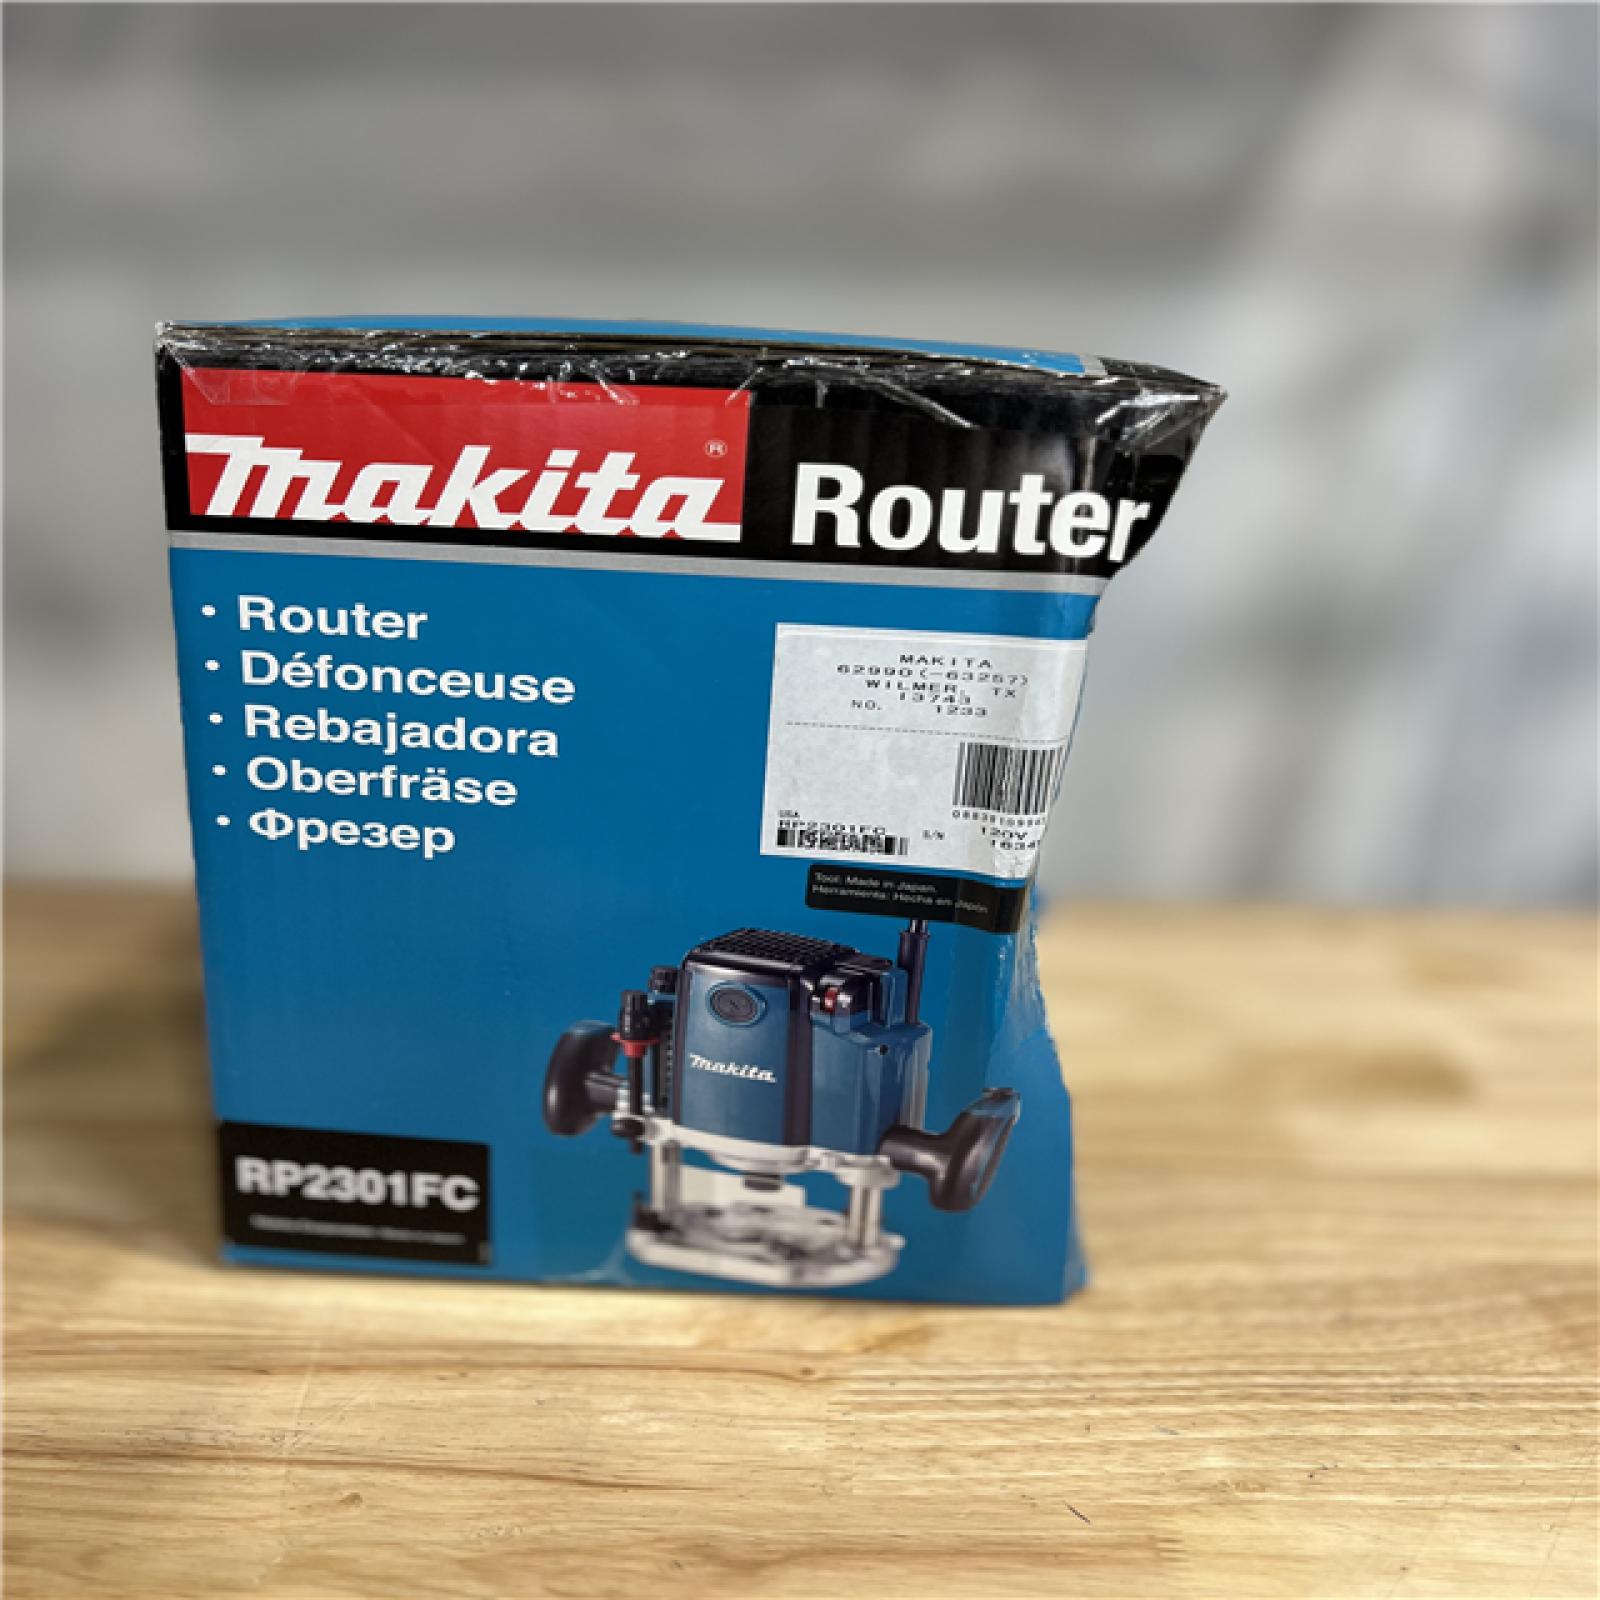 NEW! - Makita 3-1/4 HP Plunge Router with Variable Speed